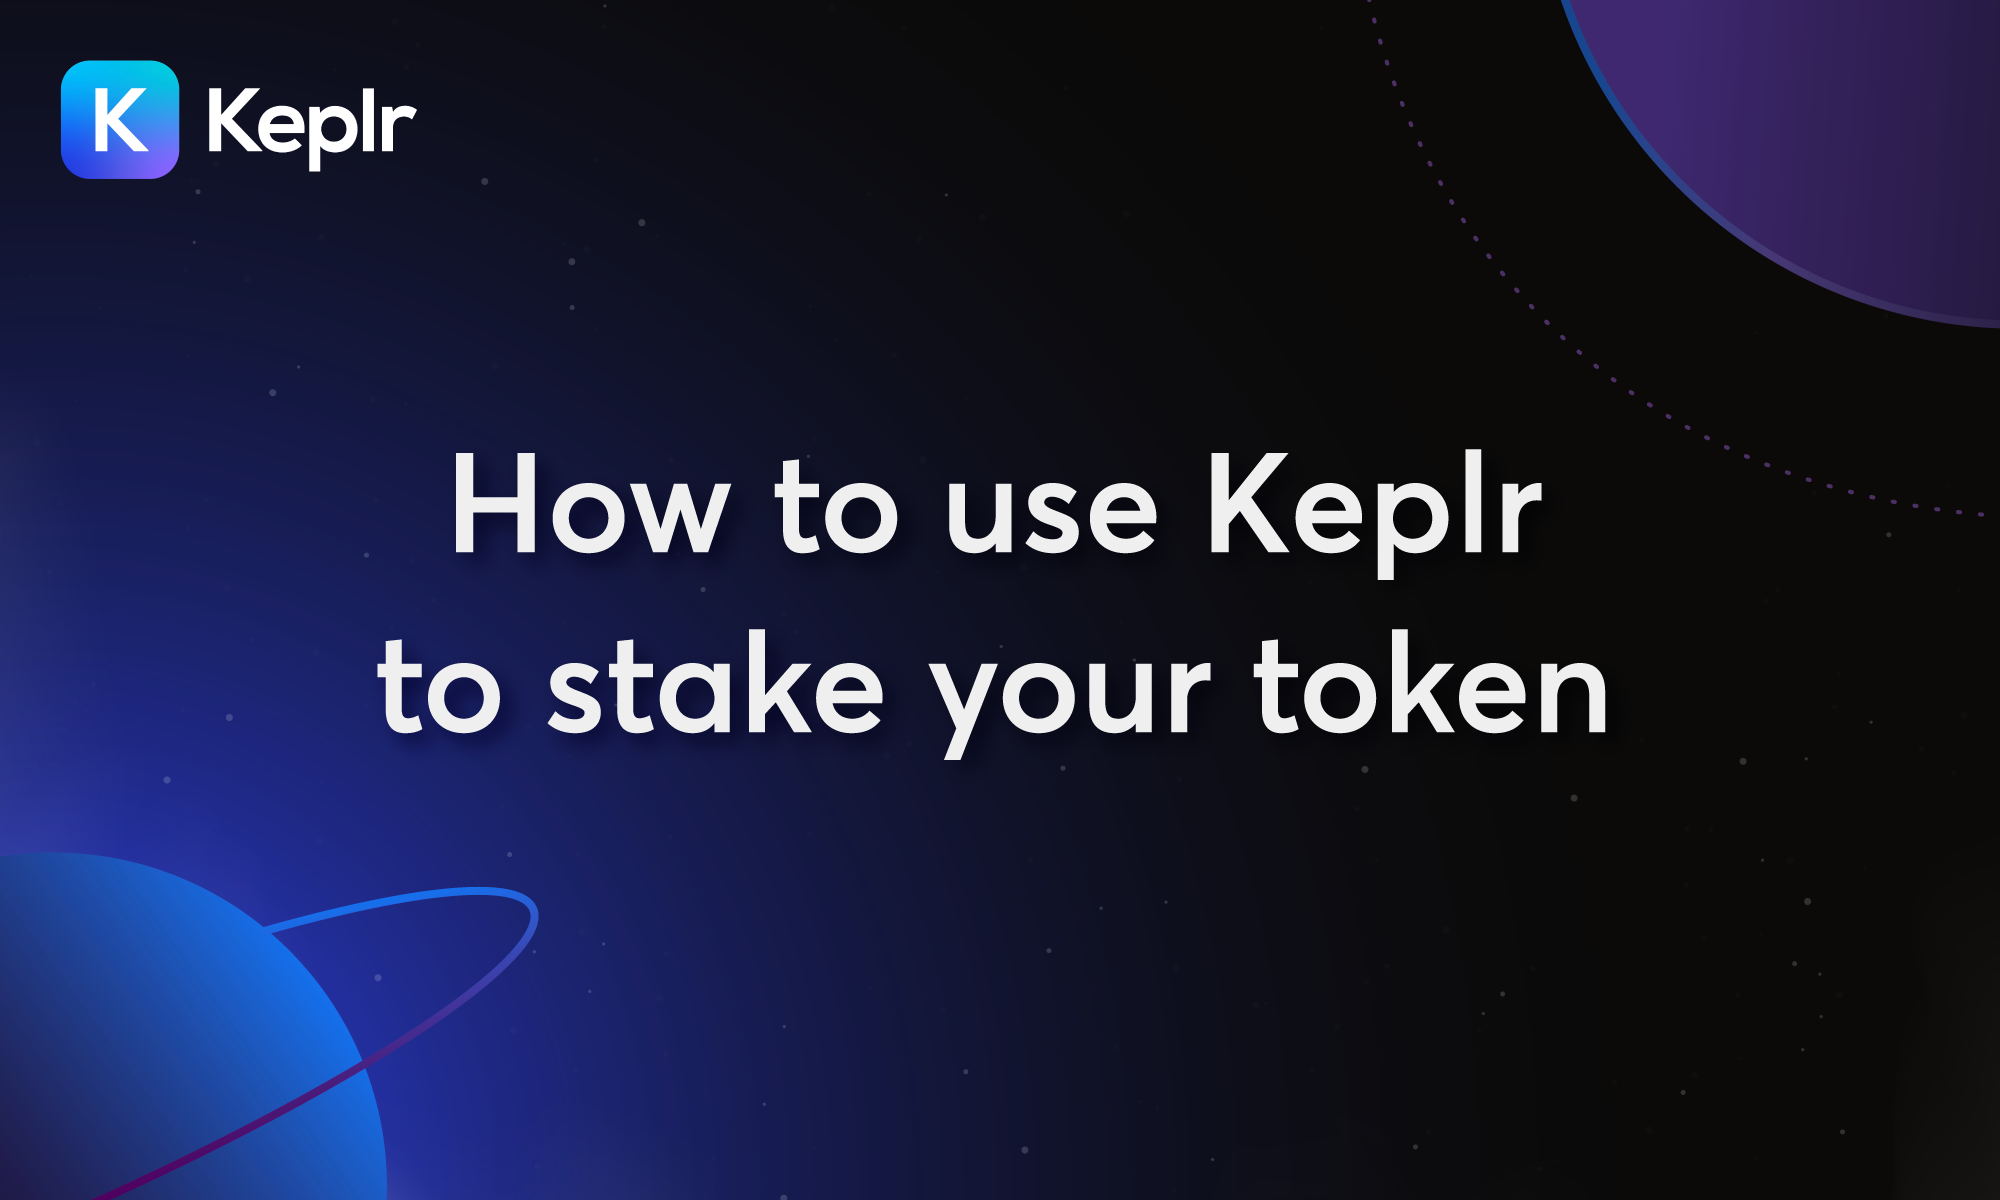 How to use Keplr to stake your token